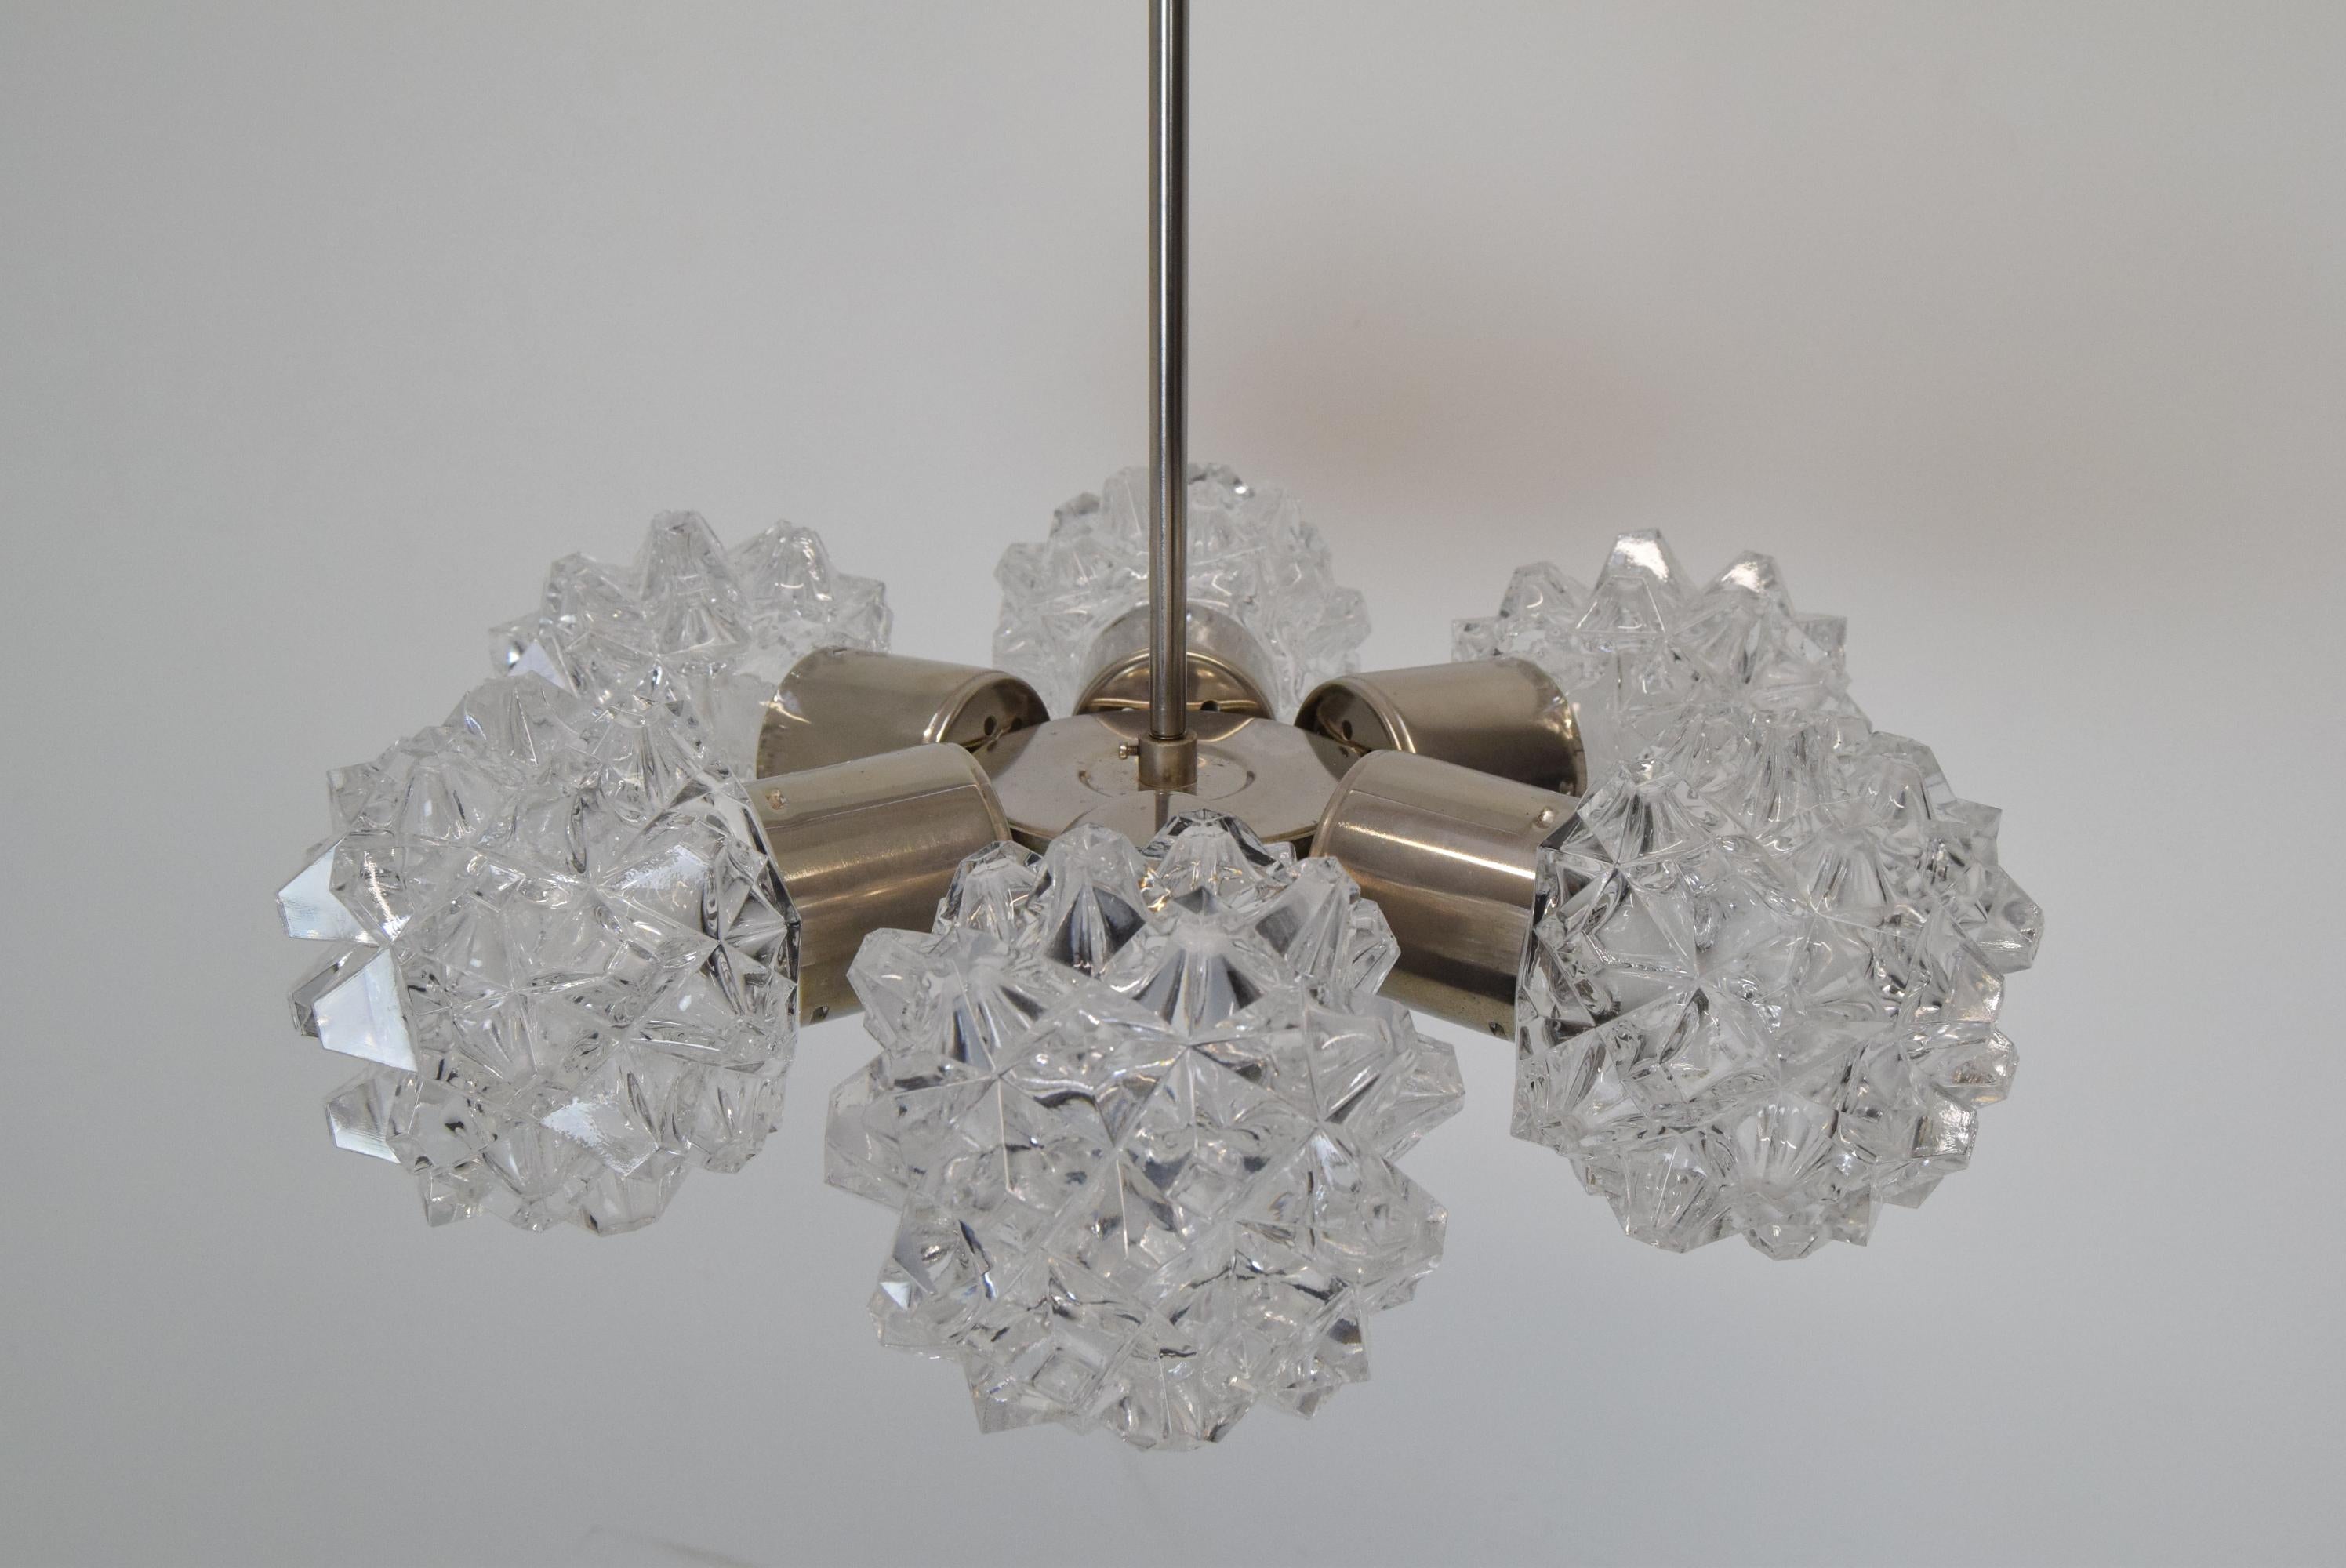 Made in Czechoslovakia 
Made of Glass, Metal, Steel 
Possible to buy 1 piece
Upon request,we can shorten the height of the chandelier
6x40W,E14 or E15 bulb
Re-polished 
Fully functional 
Good Original condition
US wiring compatible.